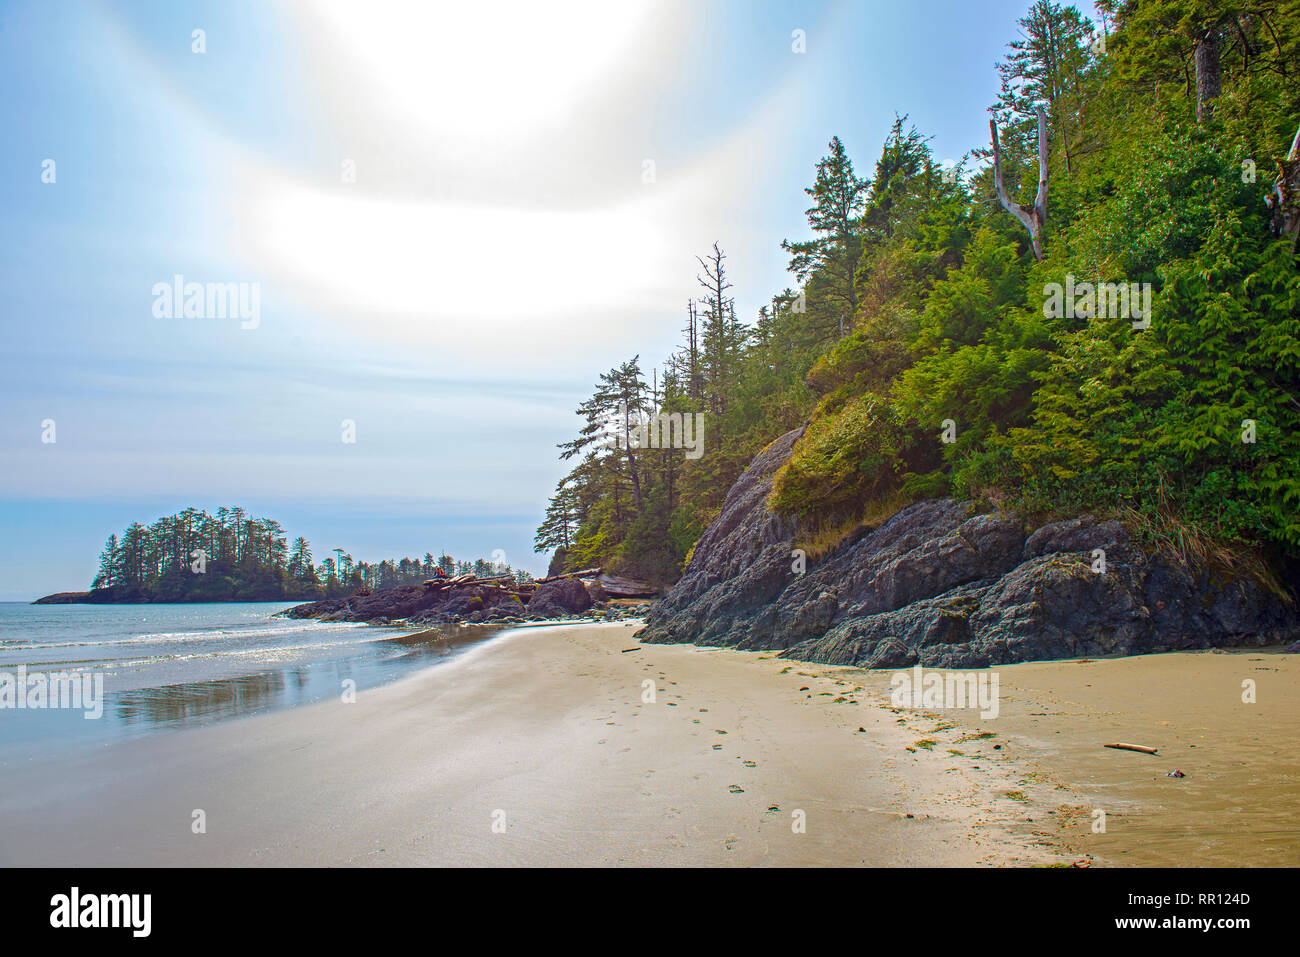 Small island with pine trees in Long Beach, Tofino, a popular destination in Vancouver Island, Canada Stock Photo